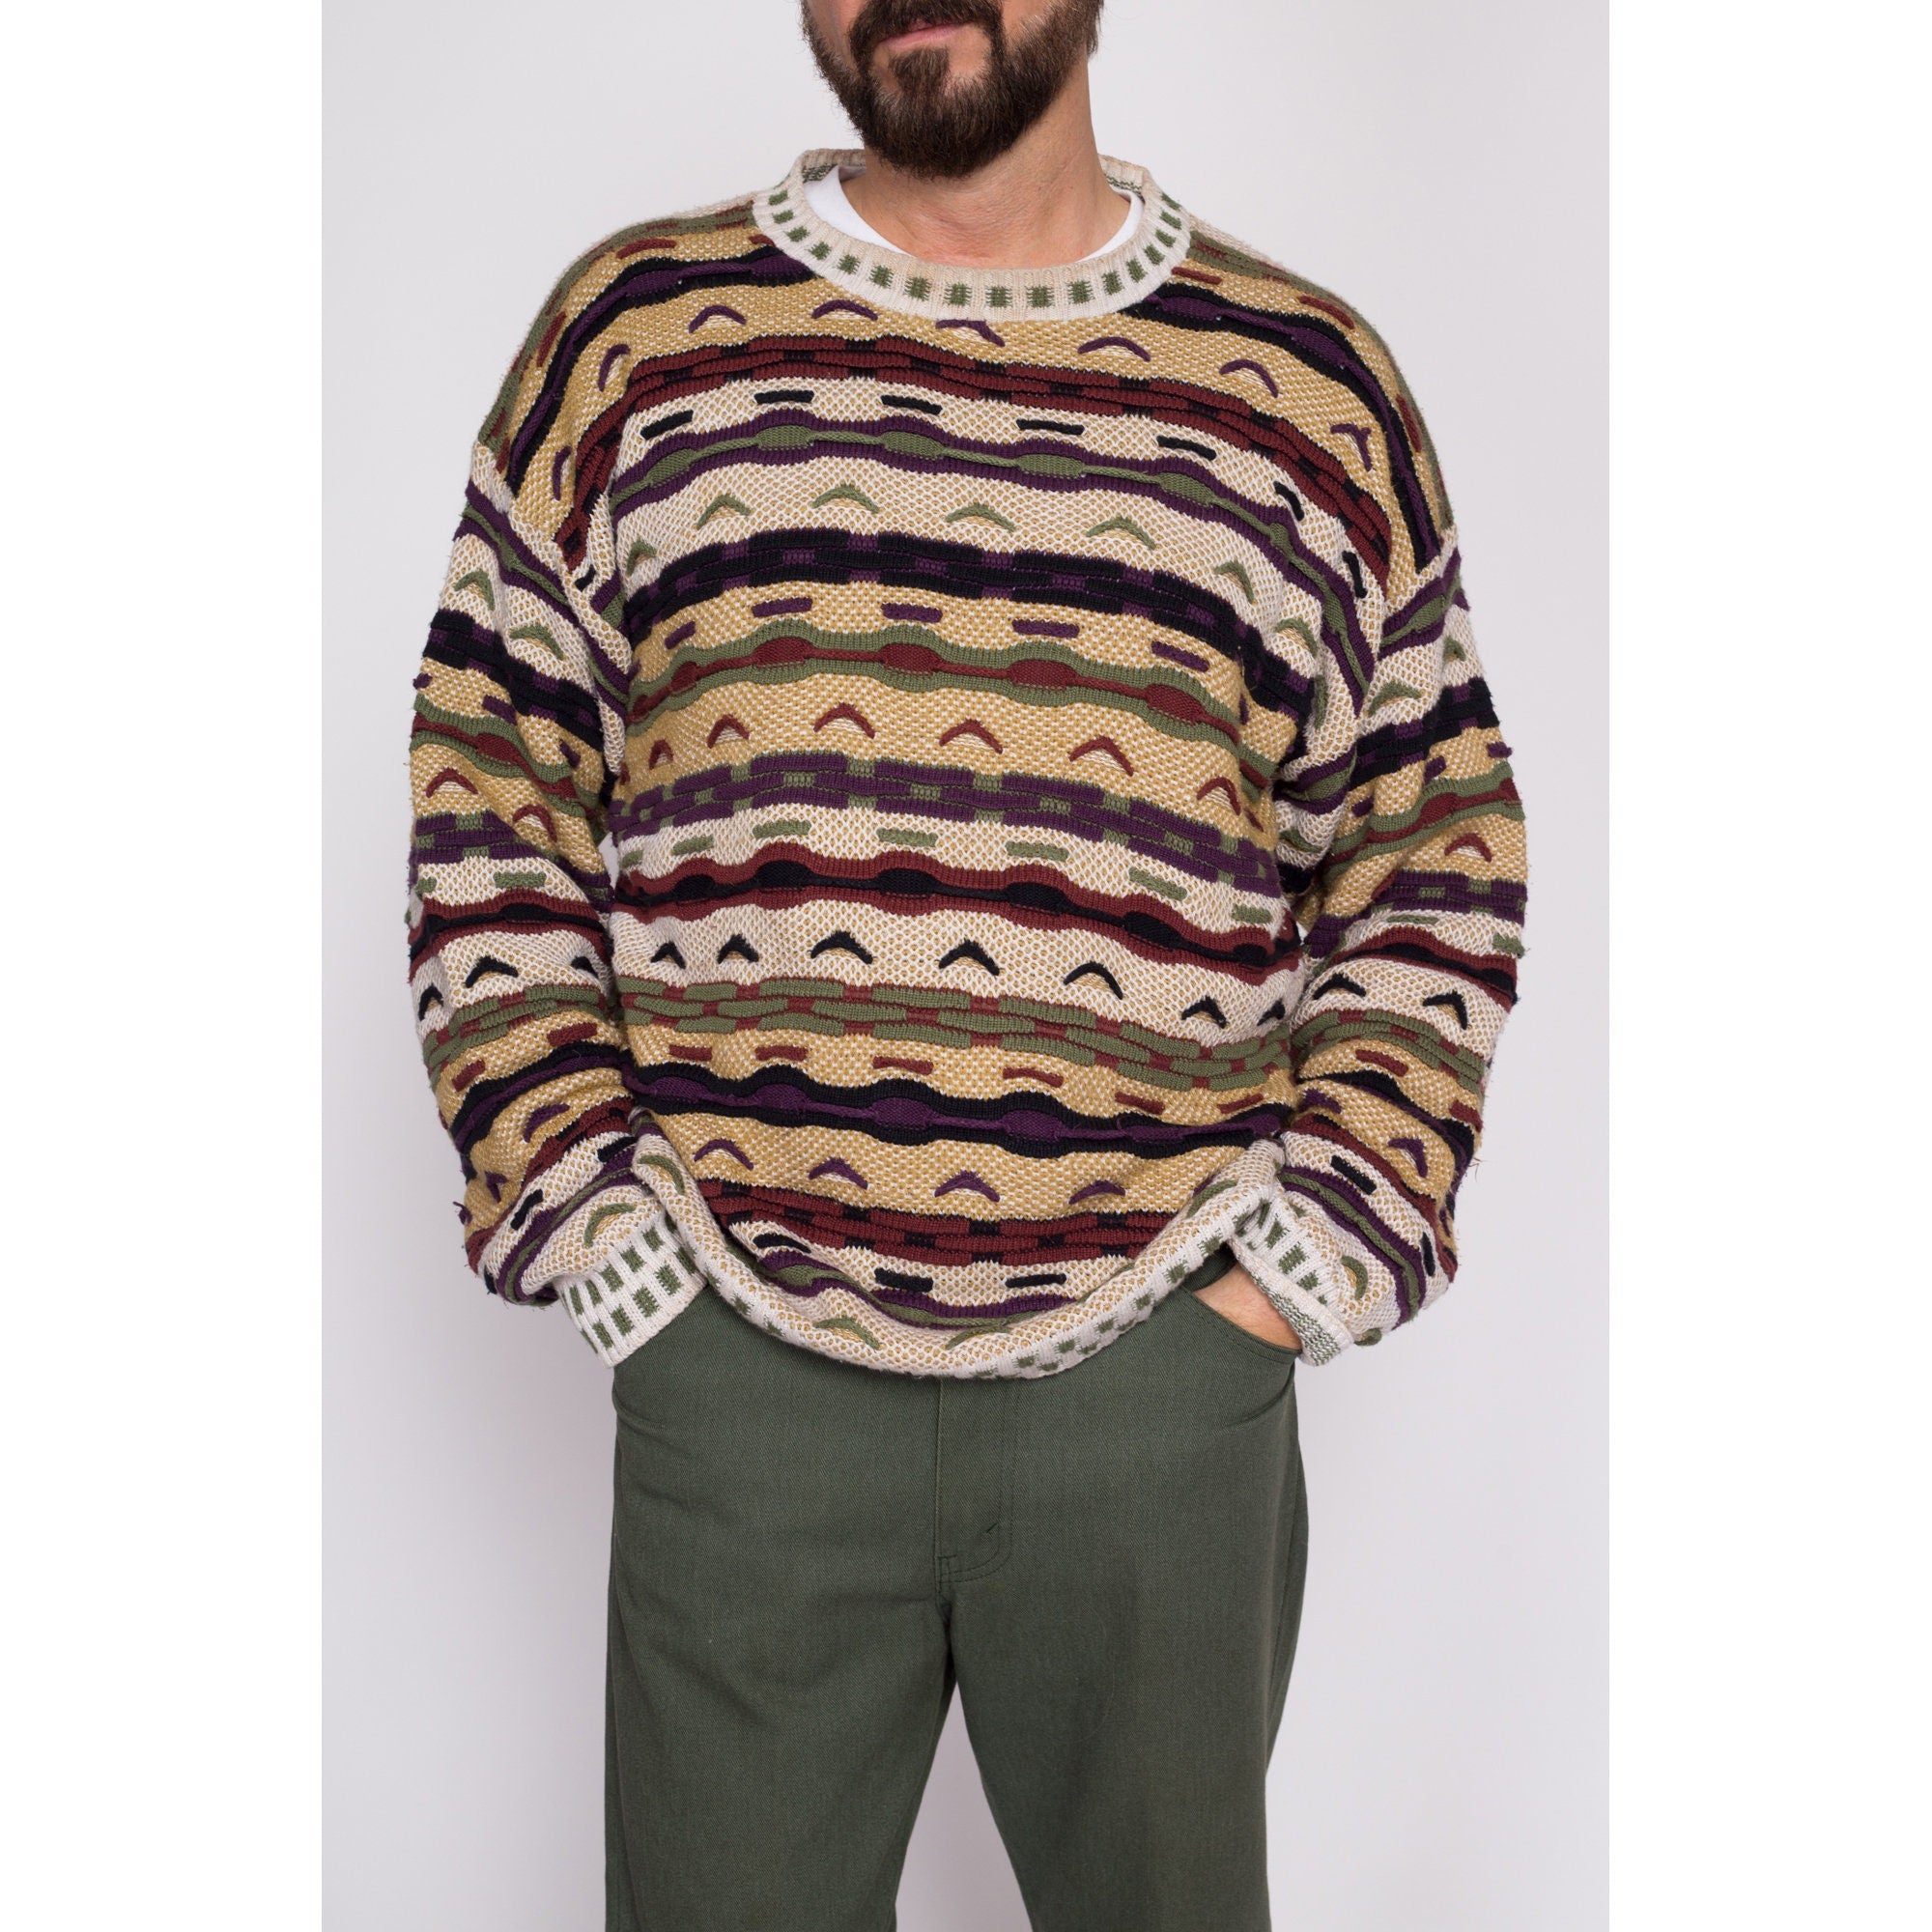 Large 90s Coogi Style 3D Knit Sweater